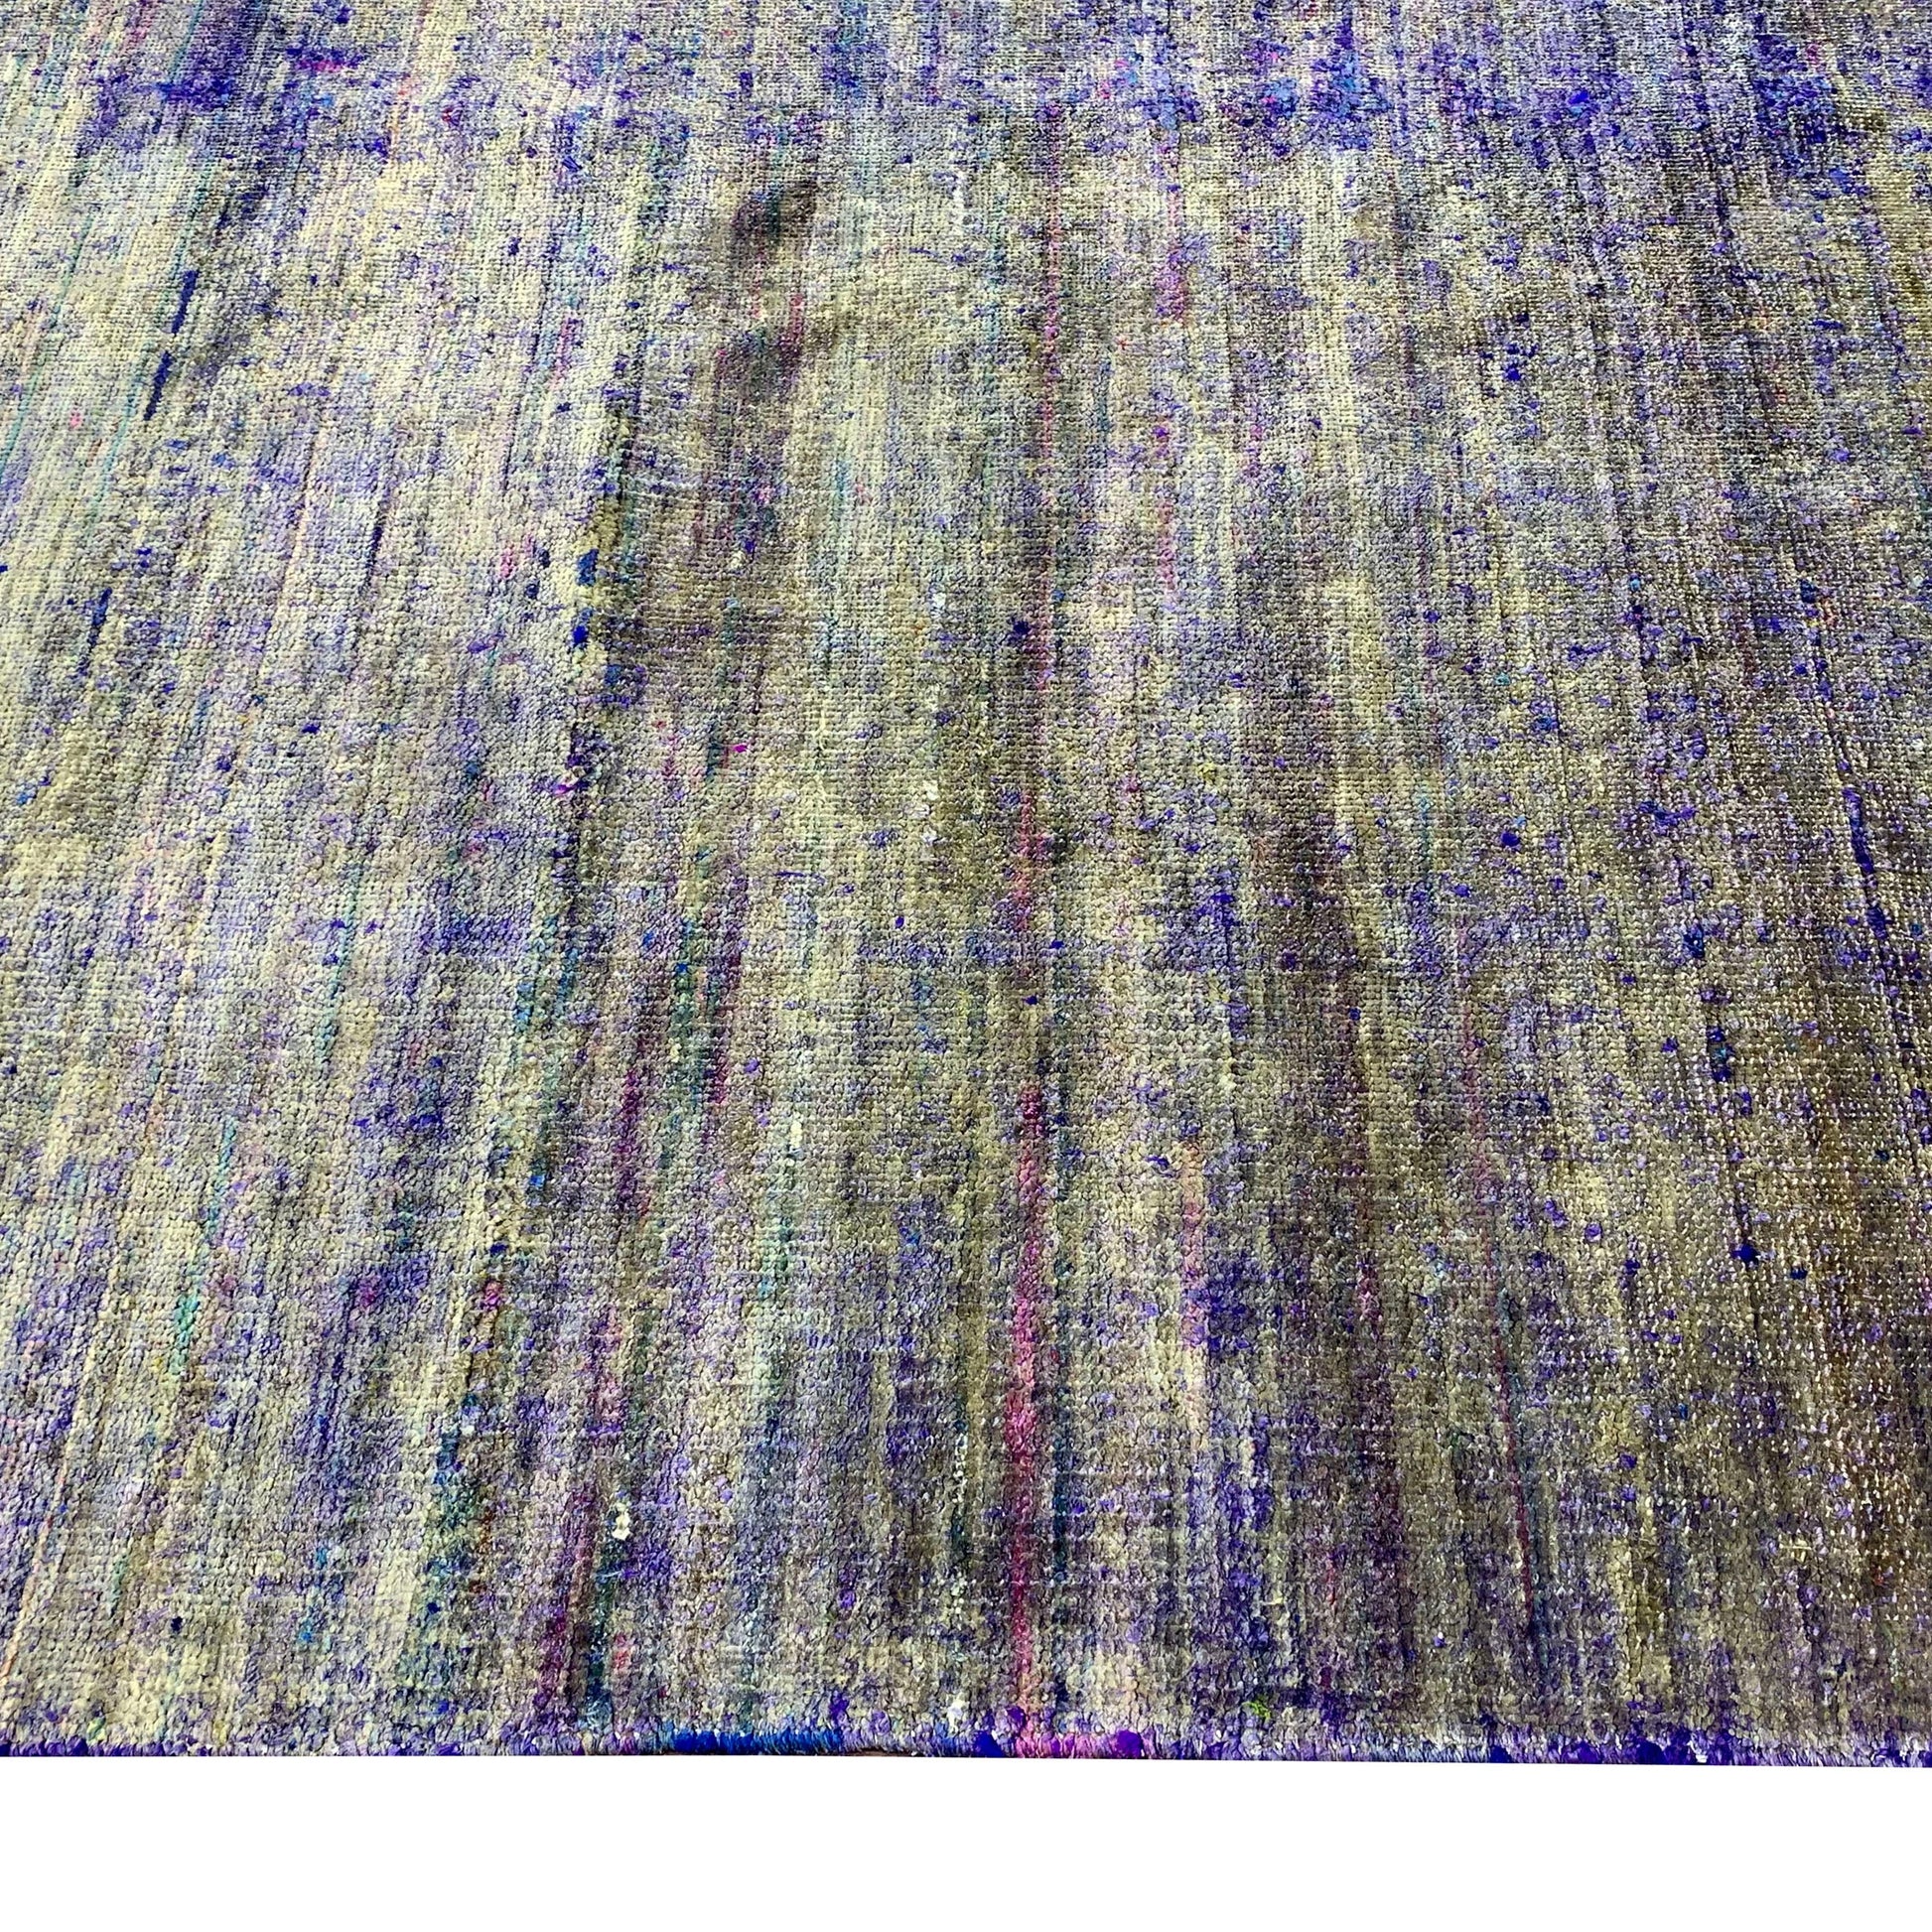 Get trendy with Blue Pure Sari Silk Modern Area Rug 5.10x8.7ft 176x260Cms - Modern Rugs available at Jaipur Oriental Rugs. Grab yours for $3610.00 today!